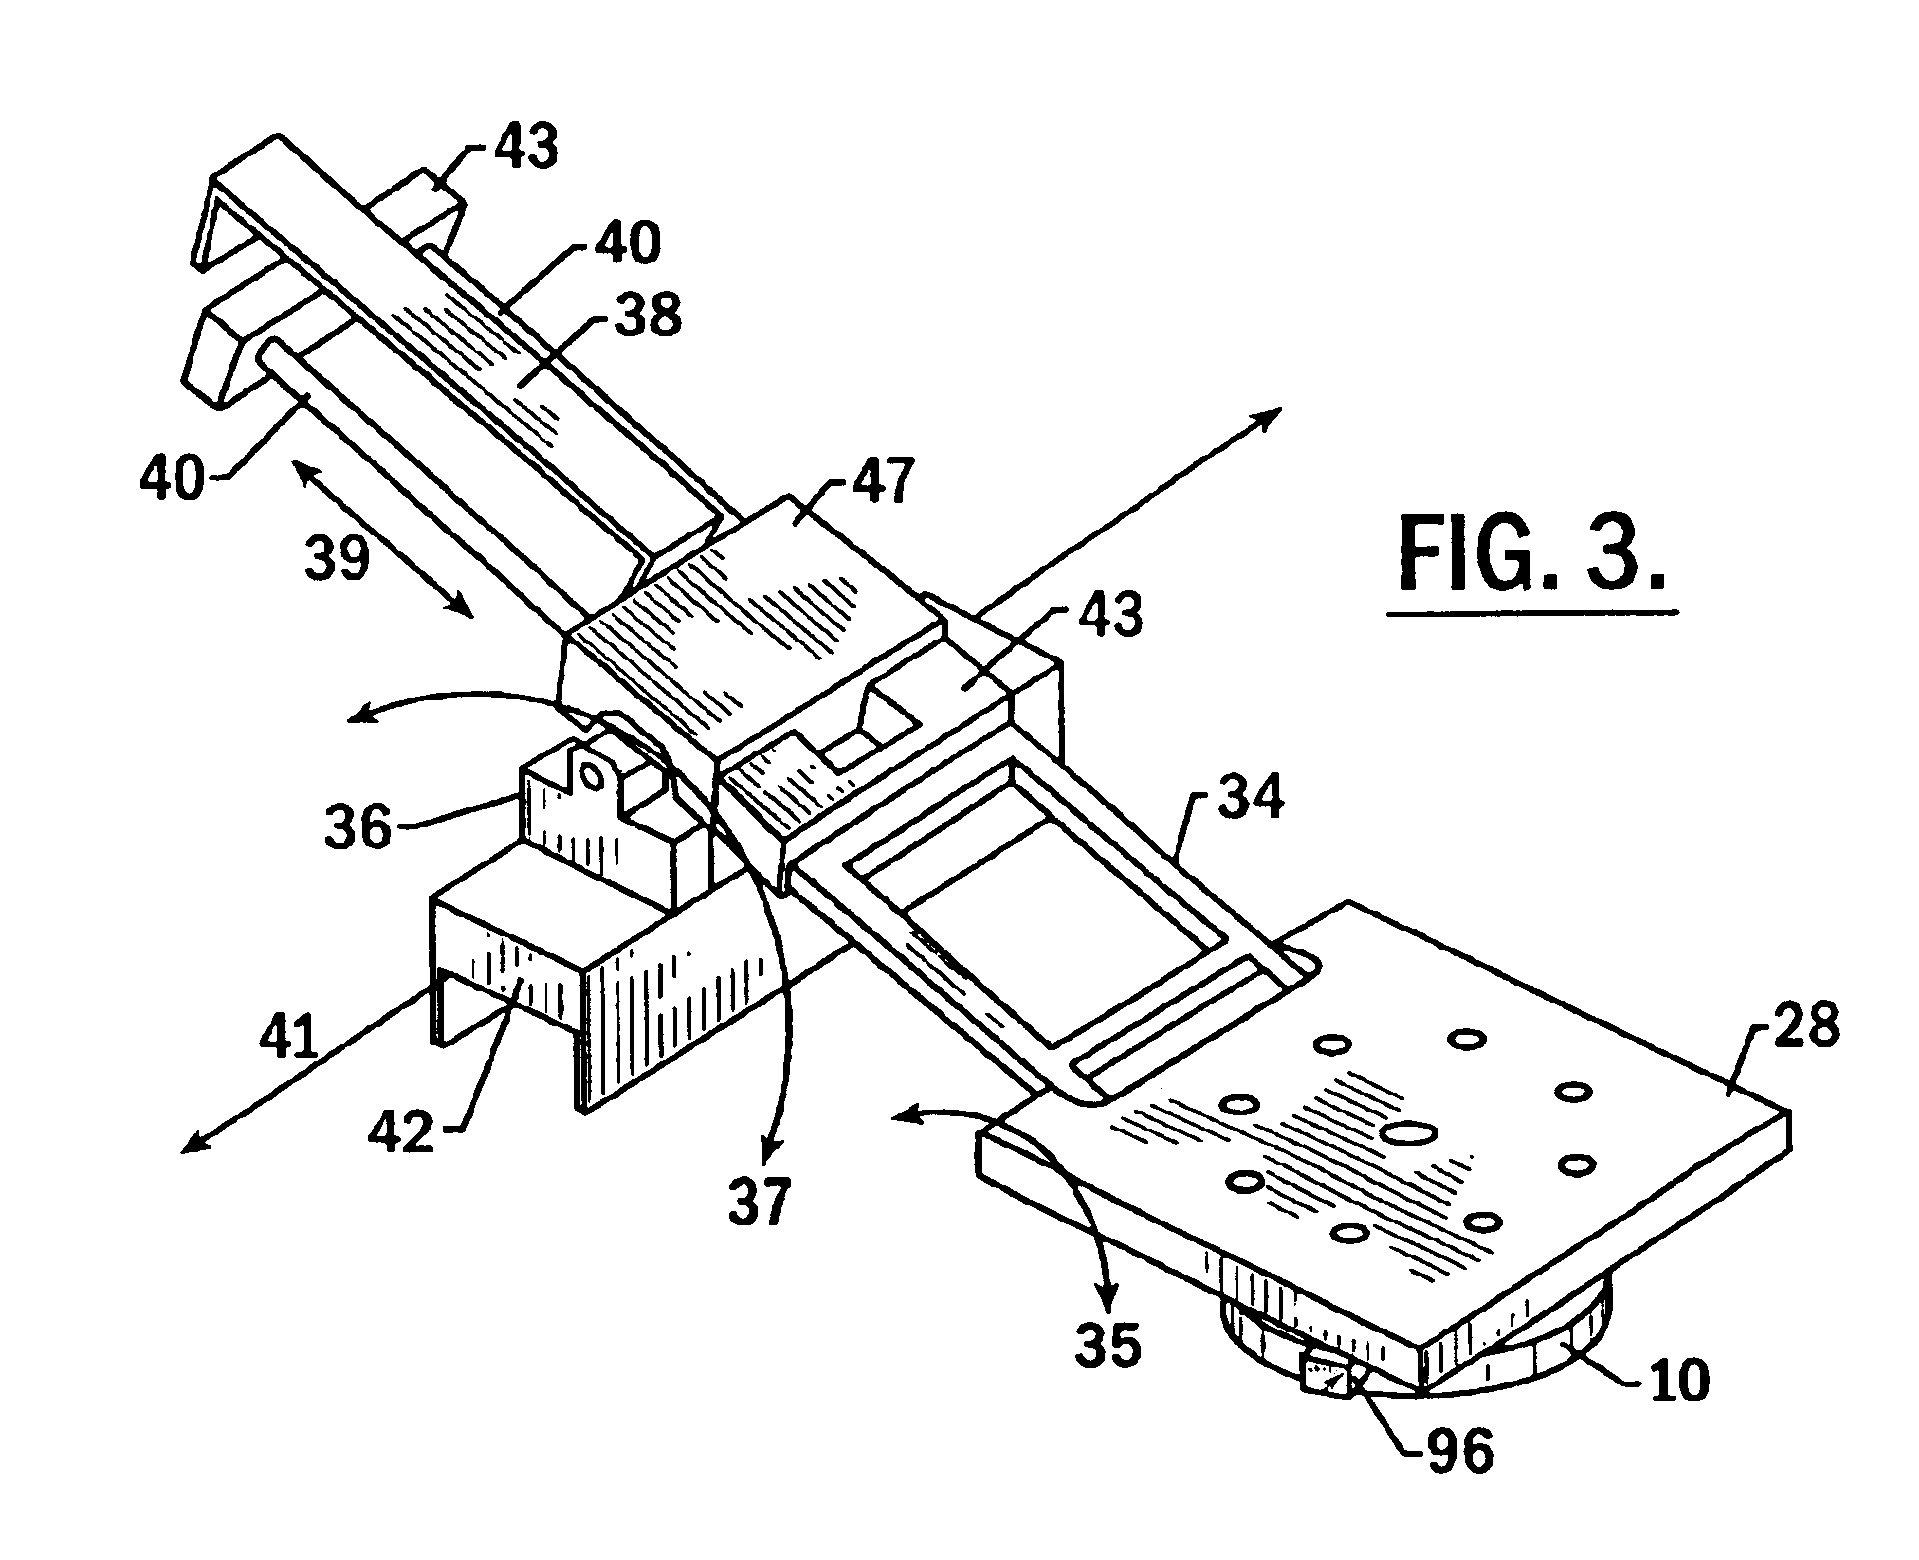 Apparatus and method for drilling holes and optionally inserting fasteners